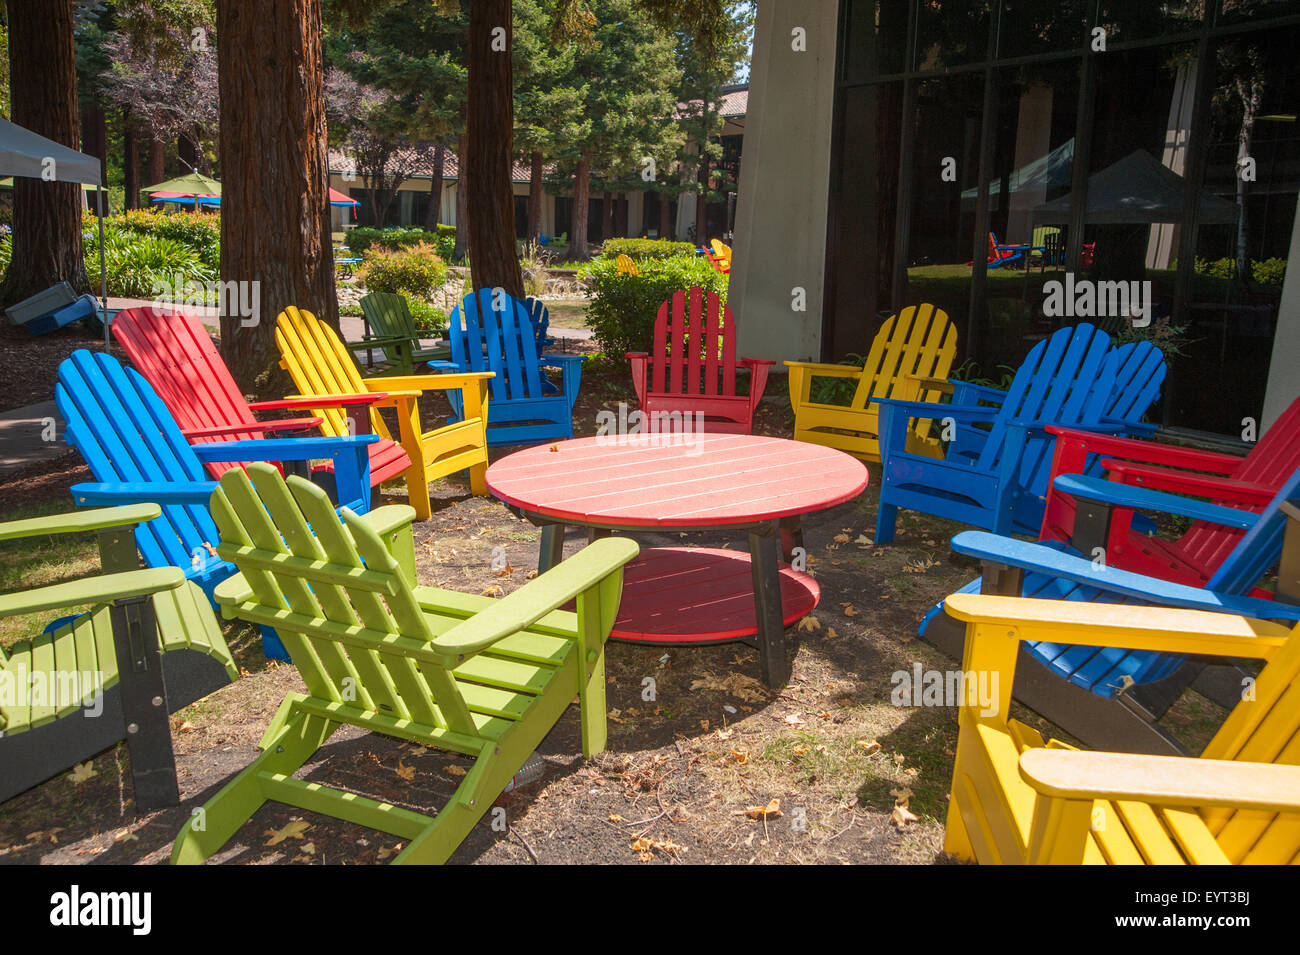 MOUNTAIN VIEW, CA - AUGUST 1, 2015: Picnick area at Google  headquarters, also known as Googleplex, in Mountain View, California Stock Photo